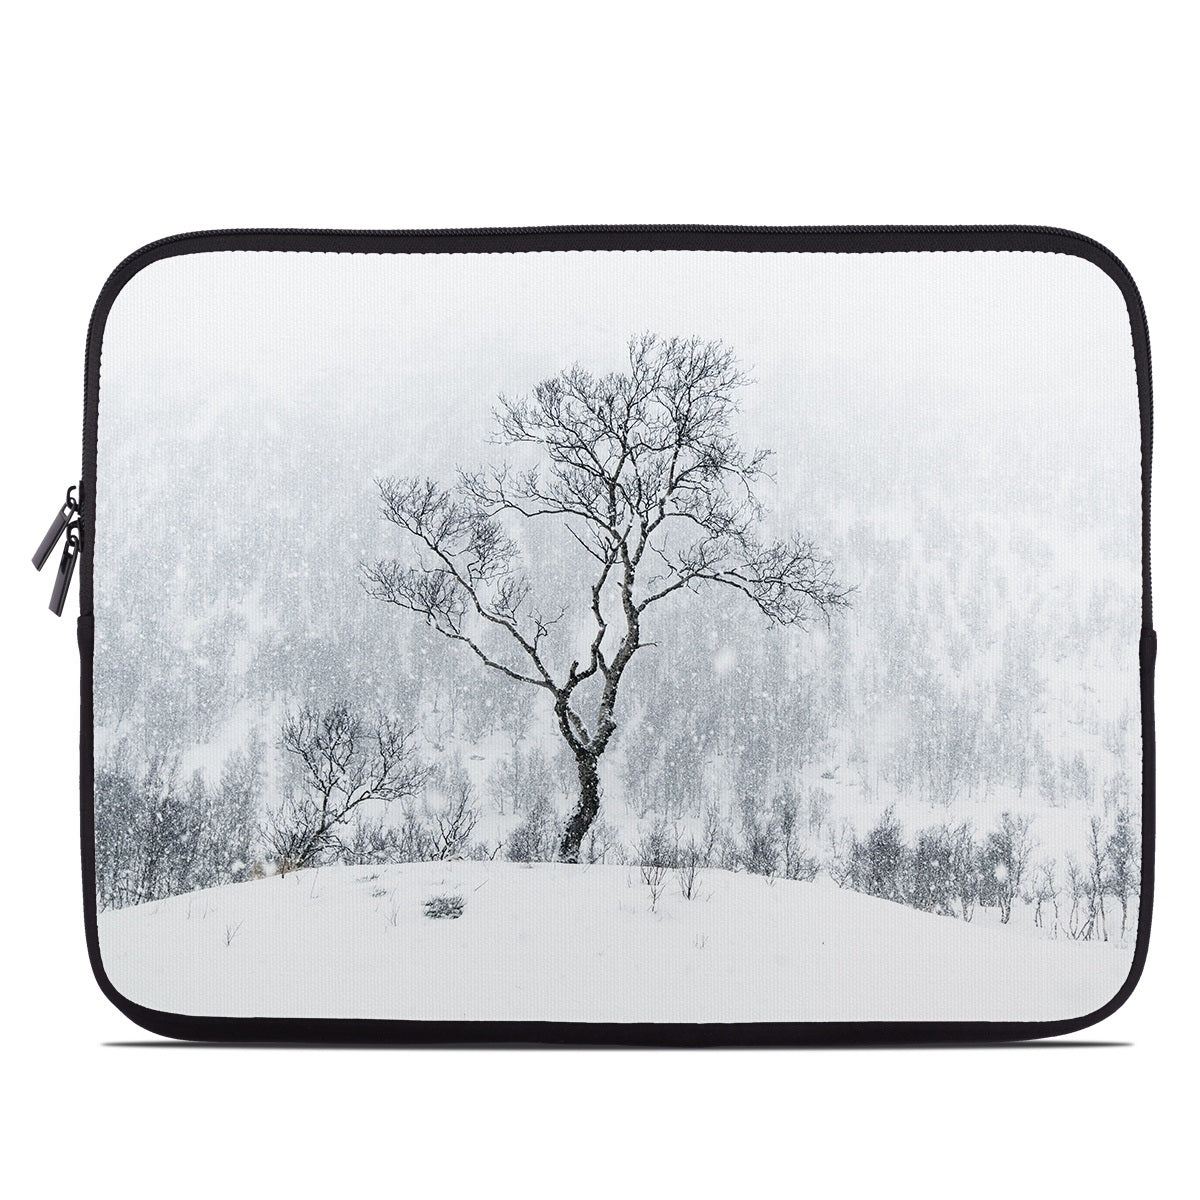 Winter Is Coming - Laptop Sleeve